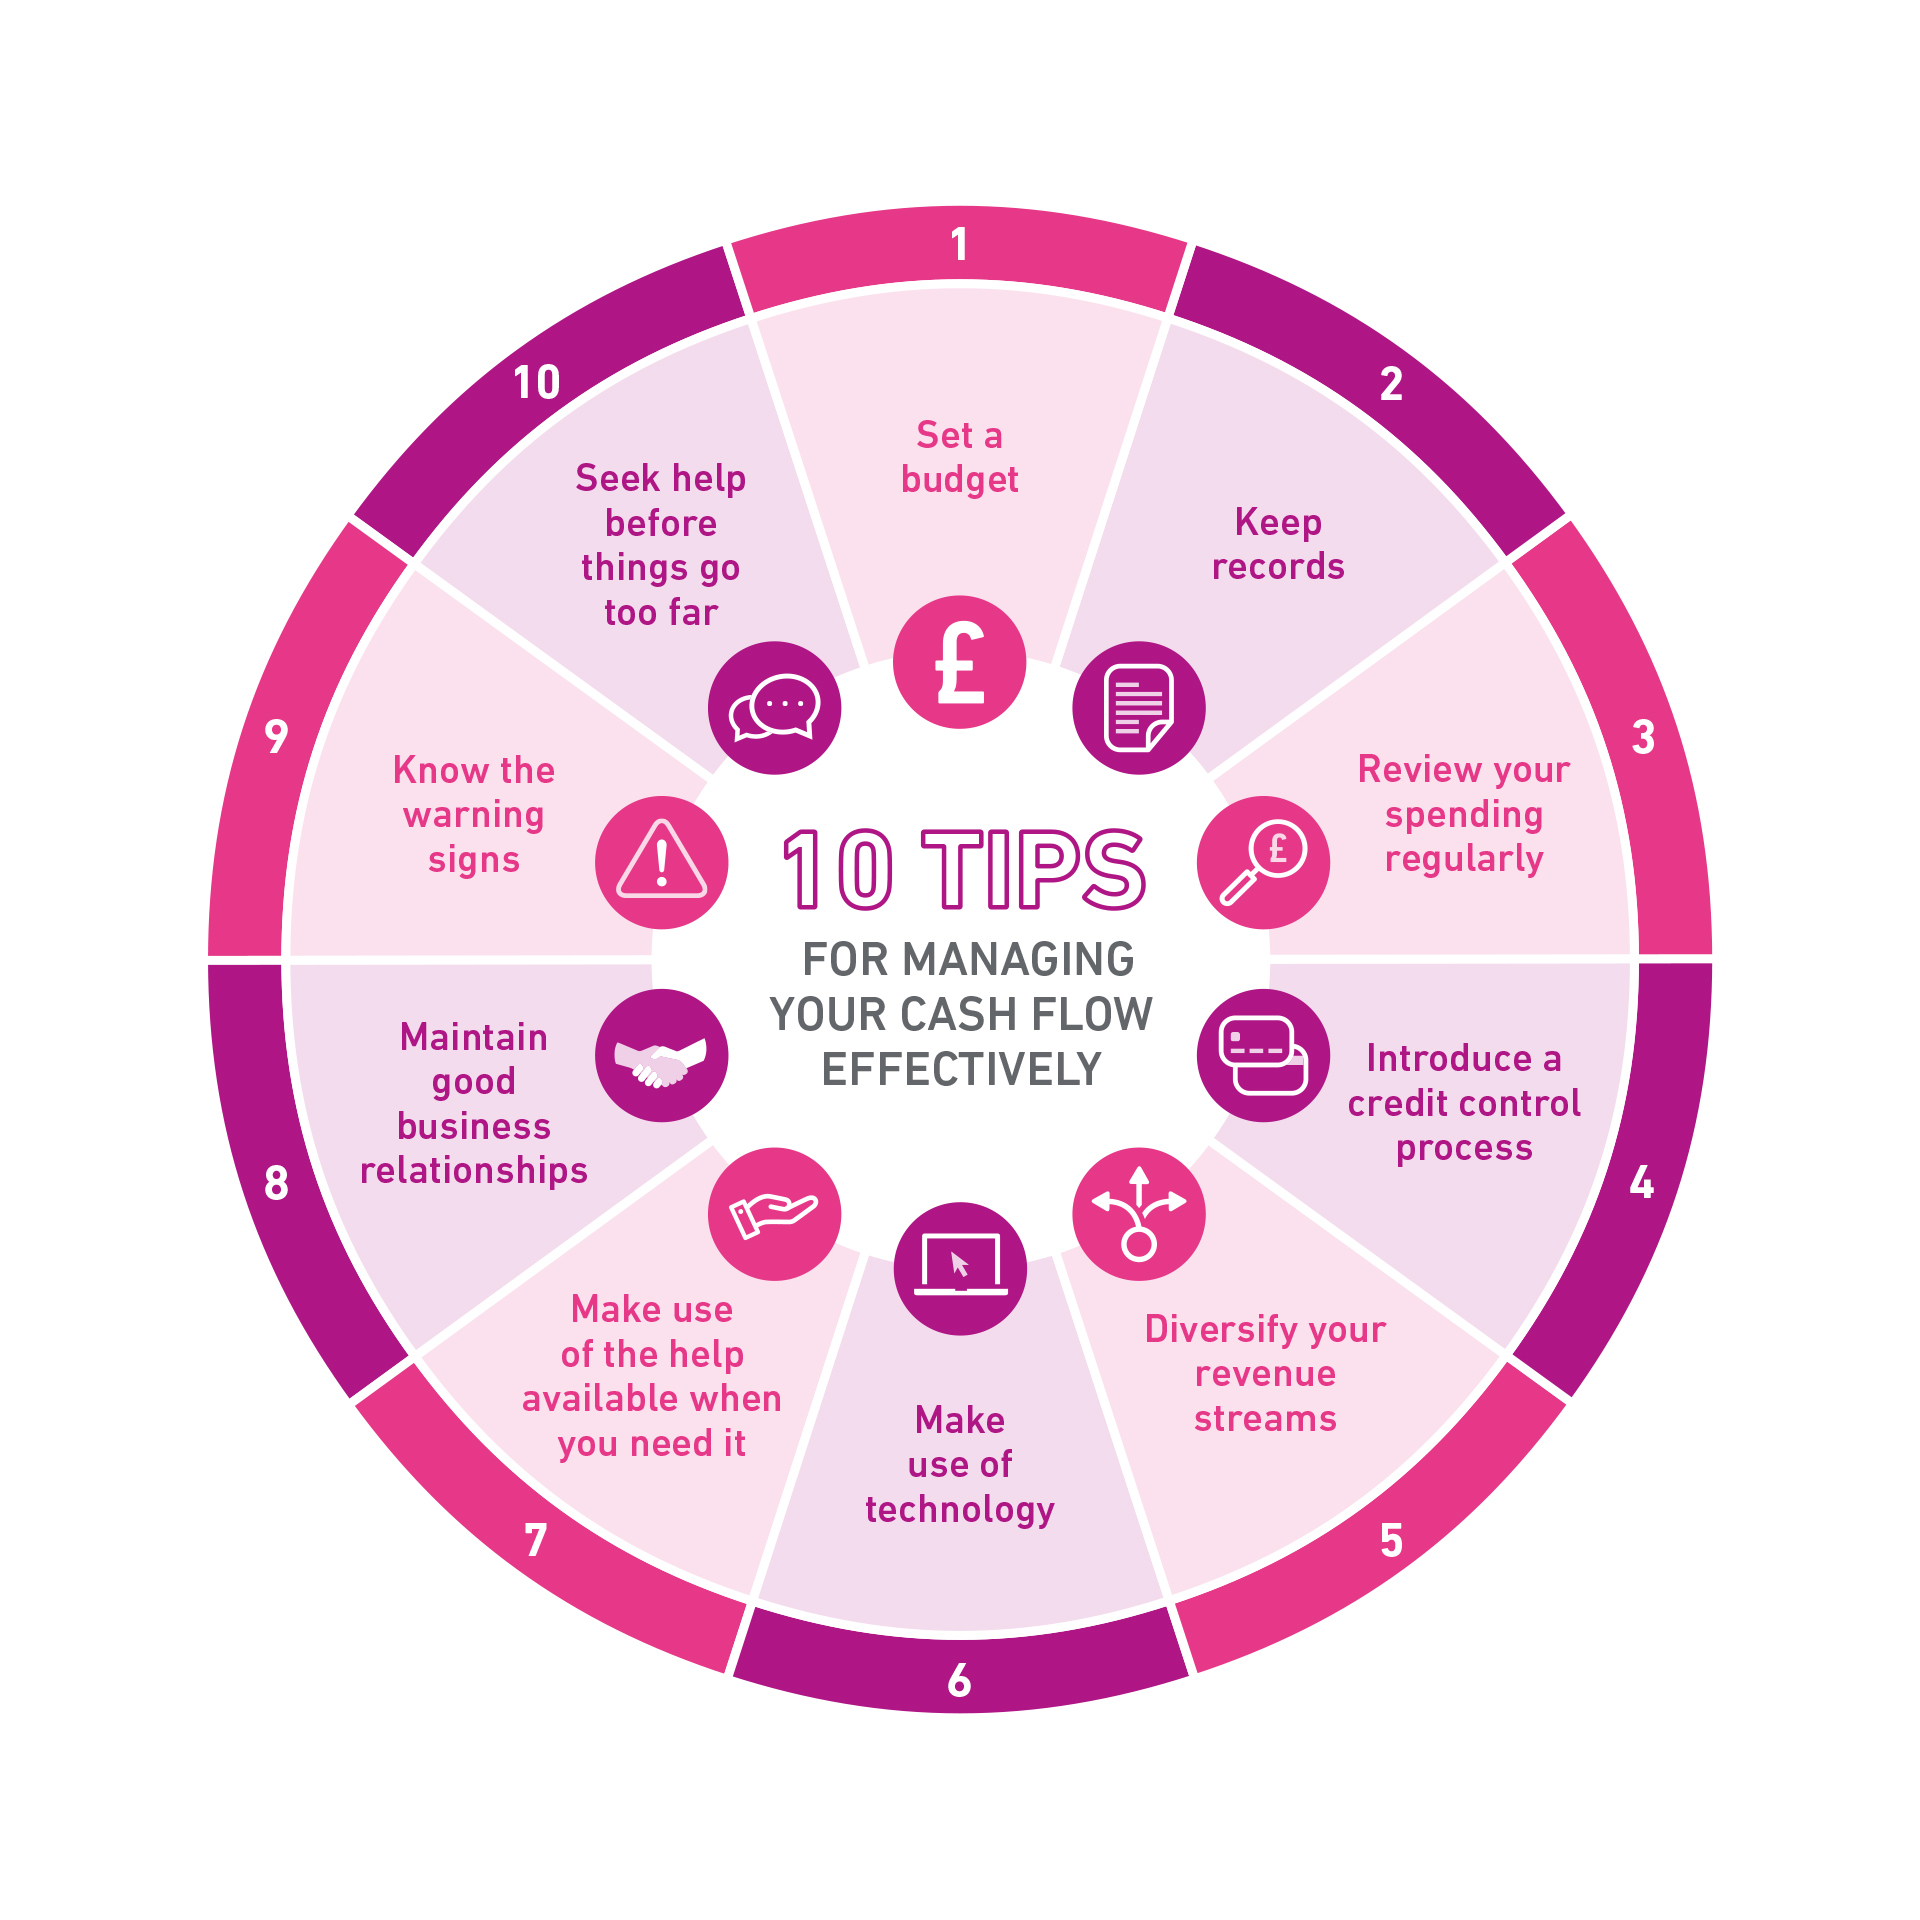 Infographic showing 10 tips for managing your cash flow effectively